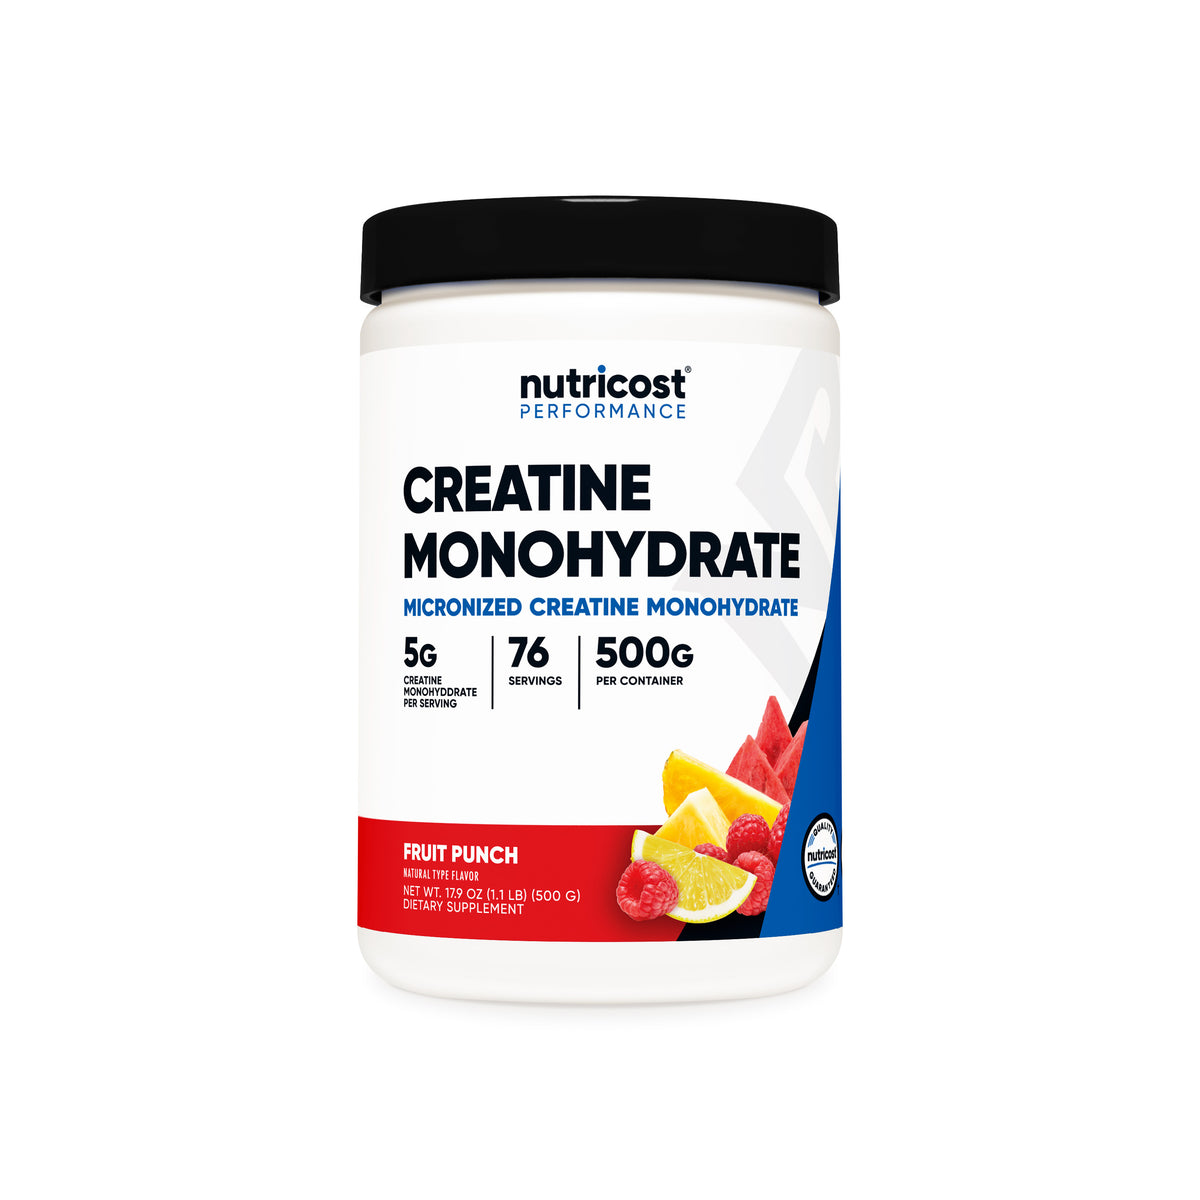 How much is 3 & 5 grams creatine (micronized) 